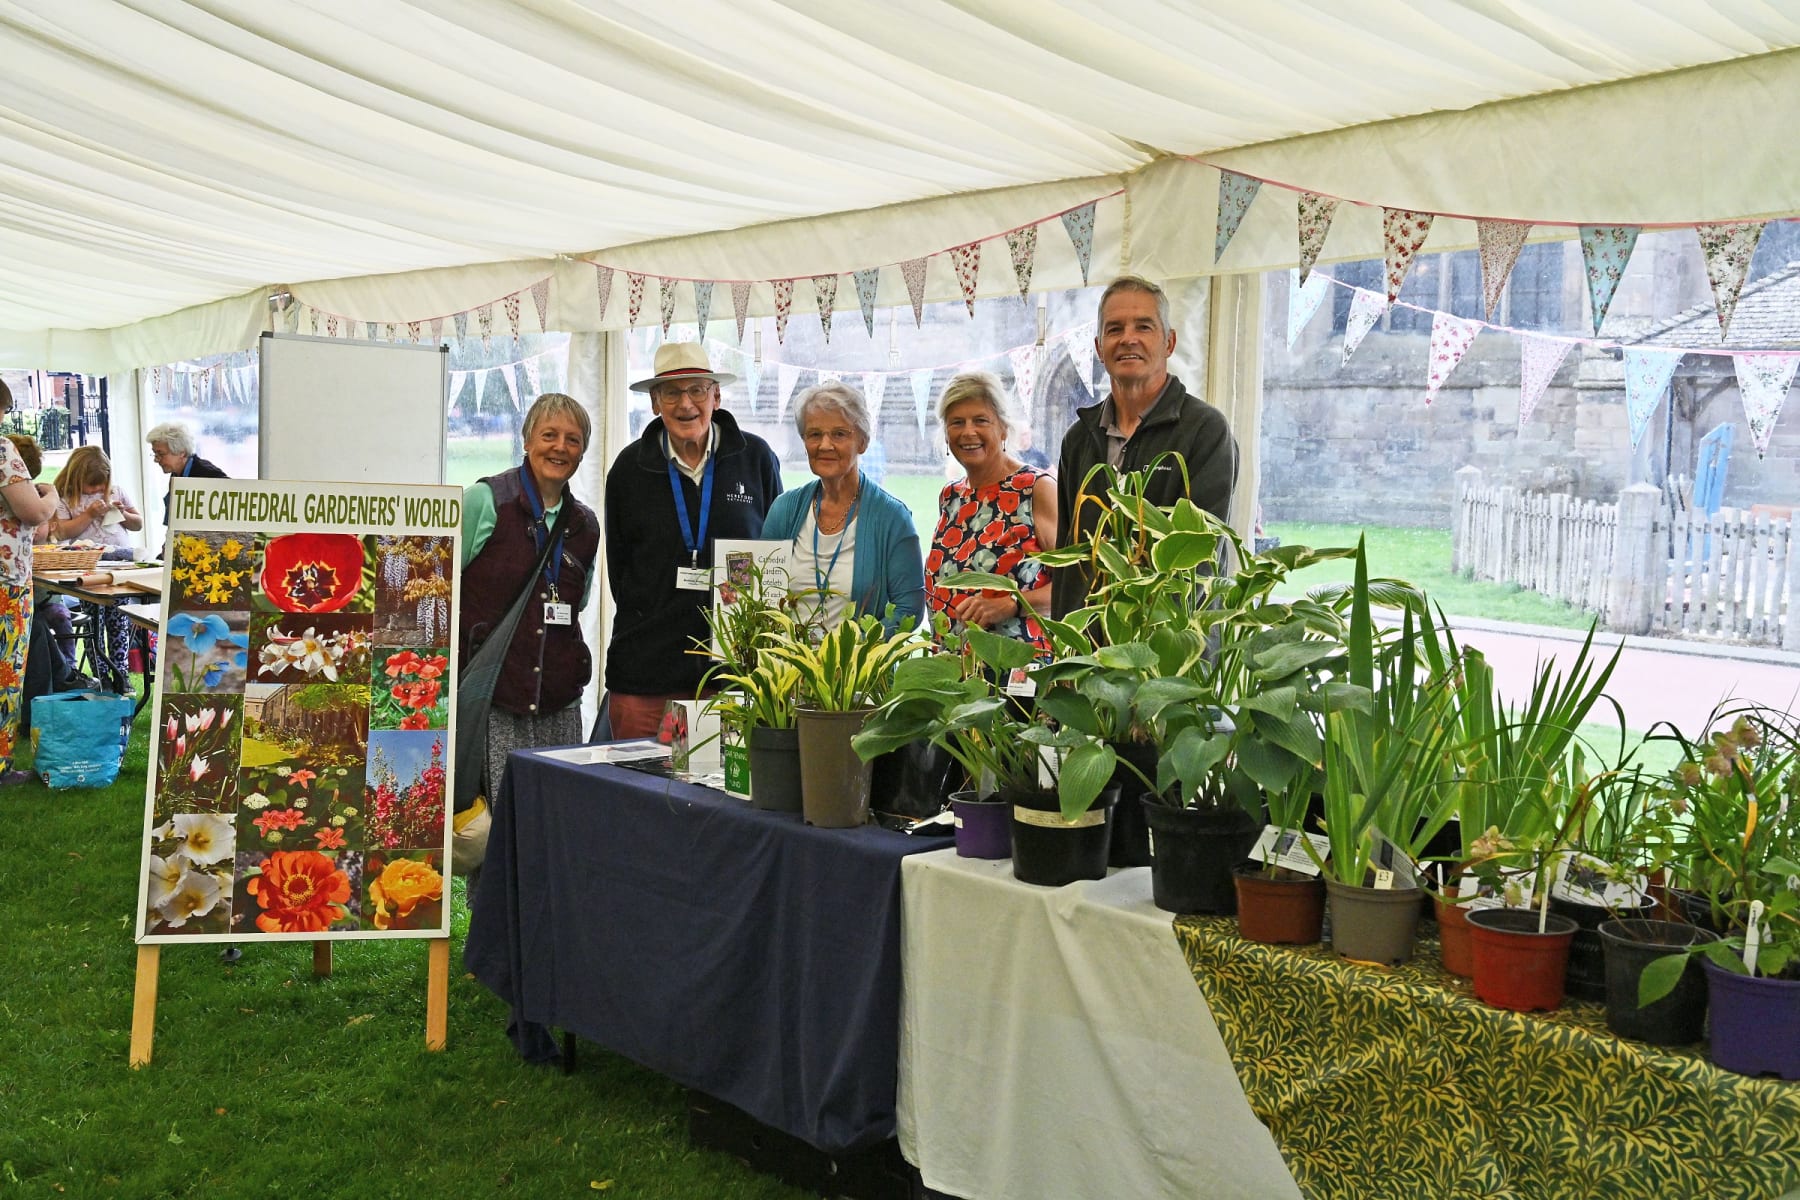 Five people are smiling at the camera inside the marquee. There is a table laden with plants in front of them